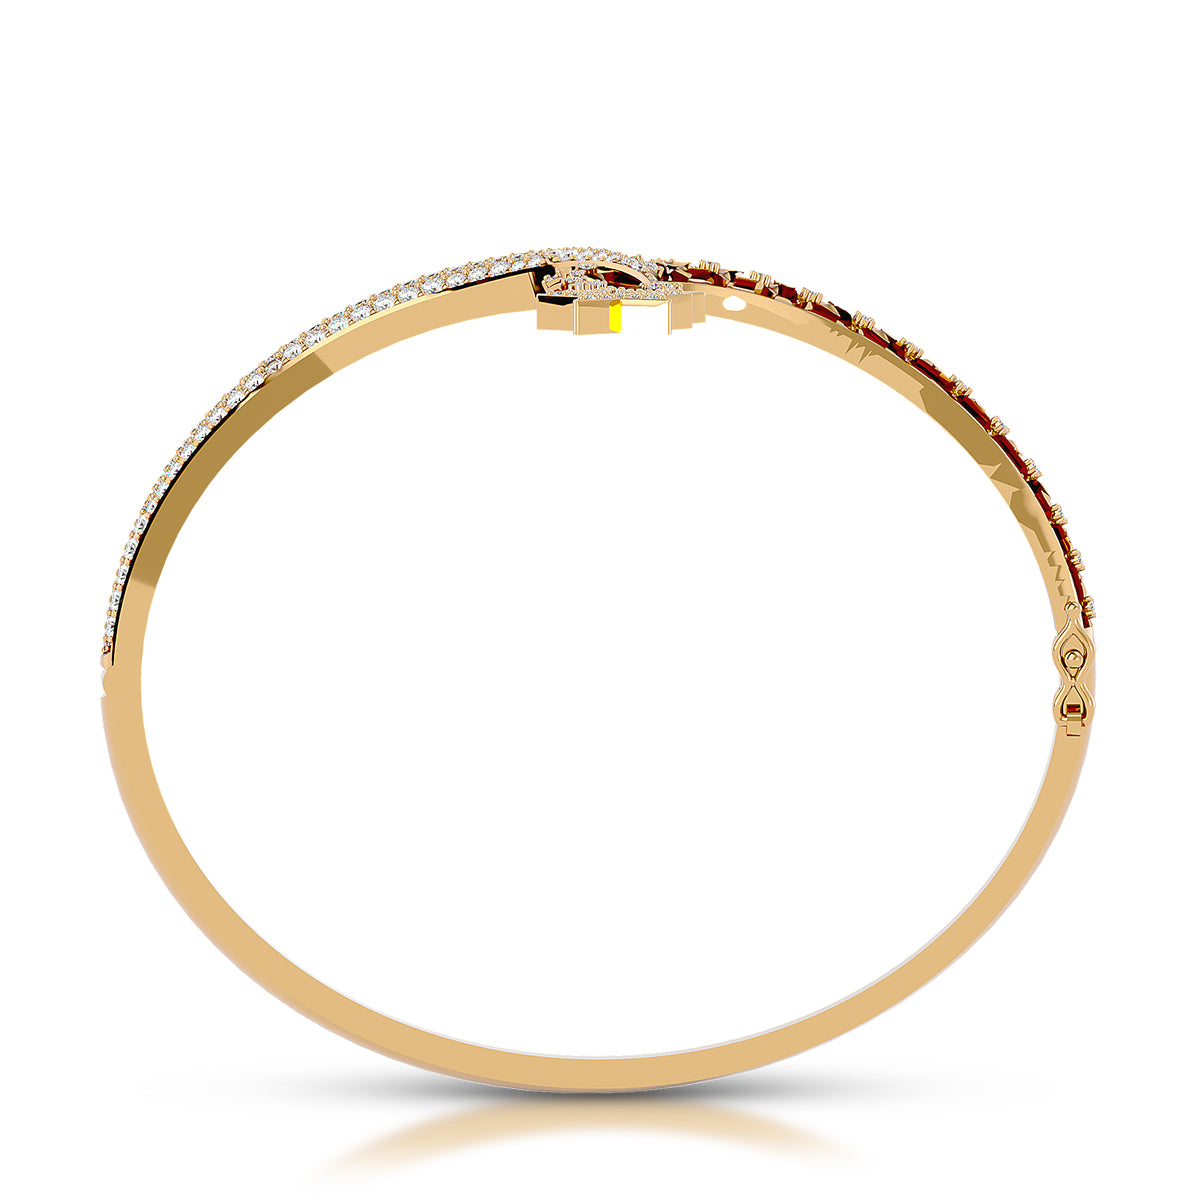 Connection Hinged Bangle Gold With Diamonds